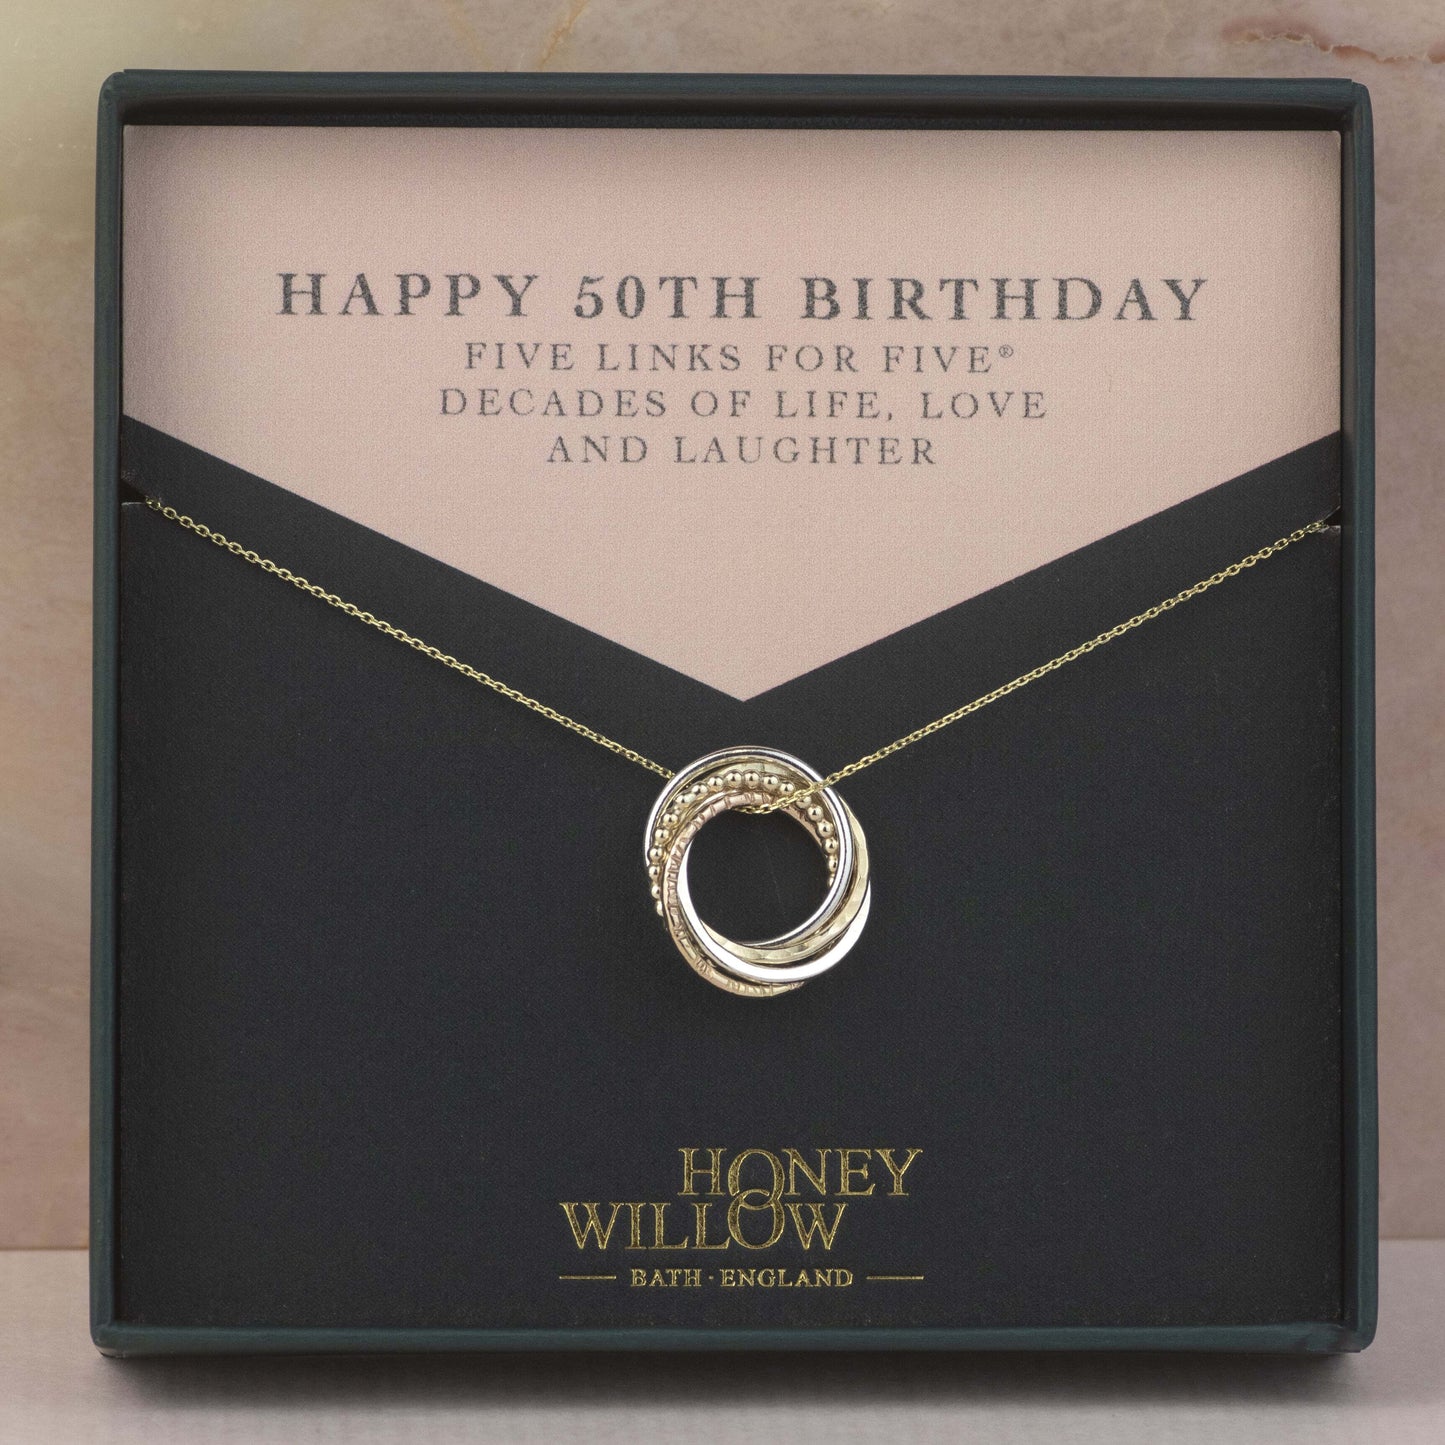 9kt Gold 50th Birthday Necklace - The Original 5 Links for 5 Decades Necklace